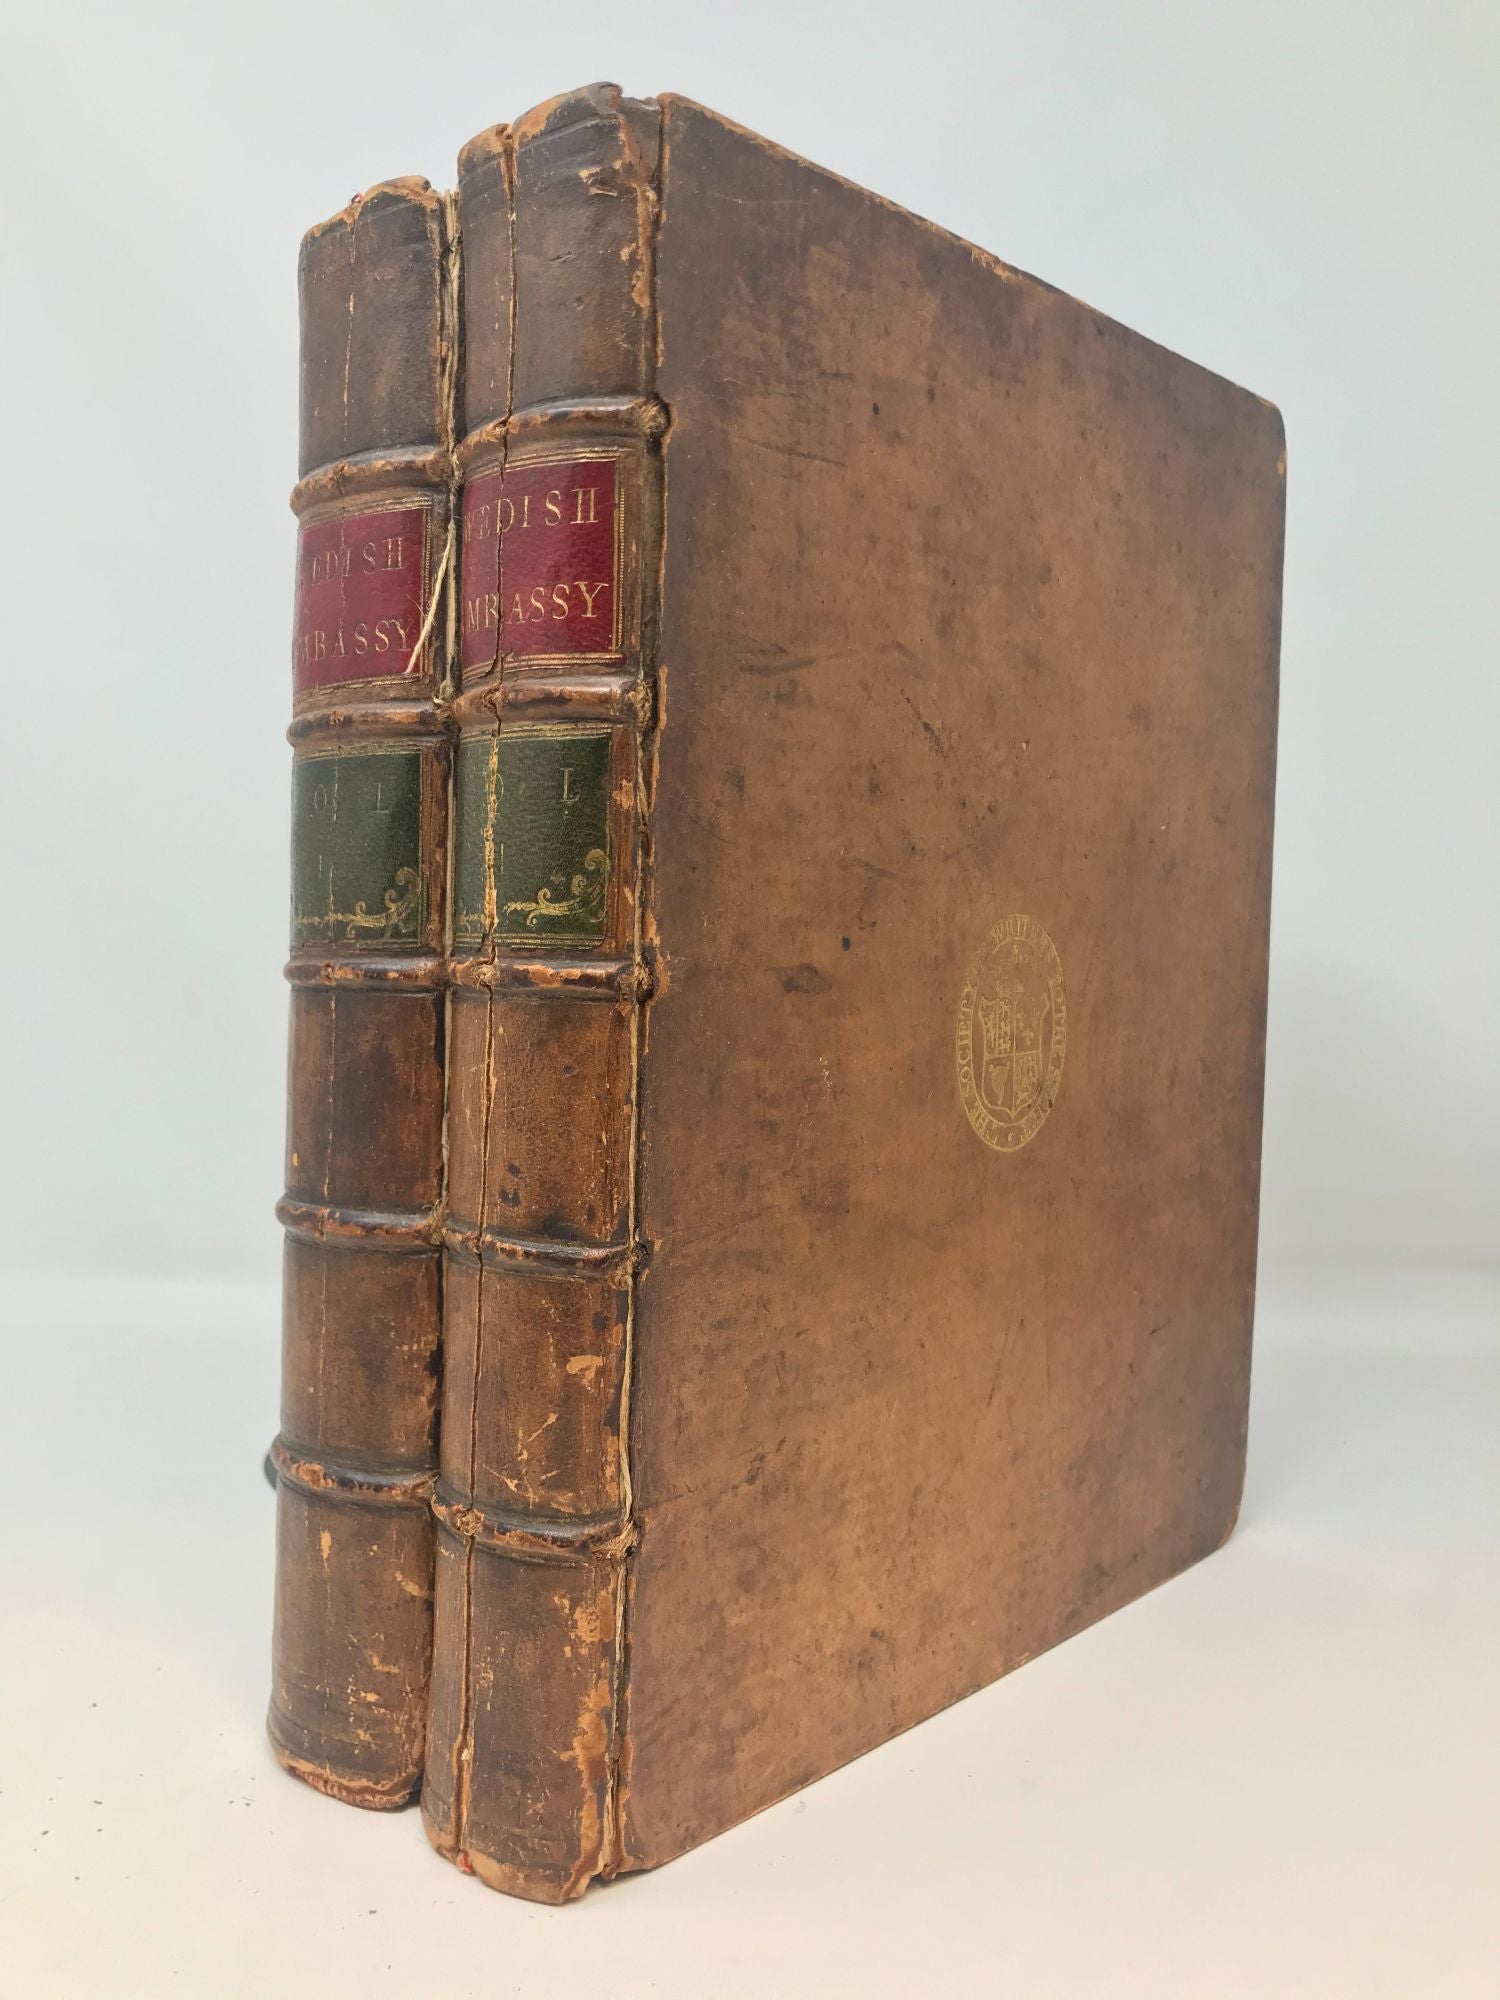 Whitelocke Bulstrode - A Journal of the Swedish Ambassy in the Years Mdccliii, and Mdcliv. From the Commonwealth of England, Scotland, and Ireland, Written by the Ambassador the Lord Commissioner Whitelocke. With an Appendix of Original Papers. (Two Volumes, Complete)